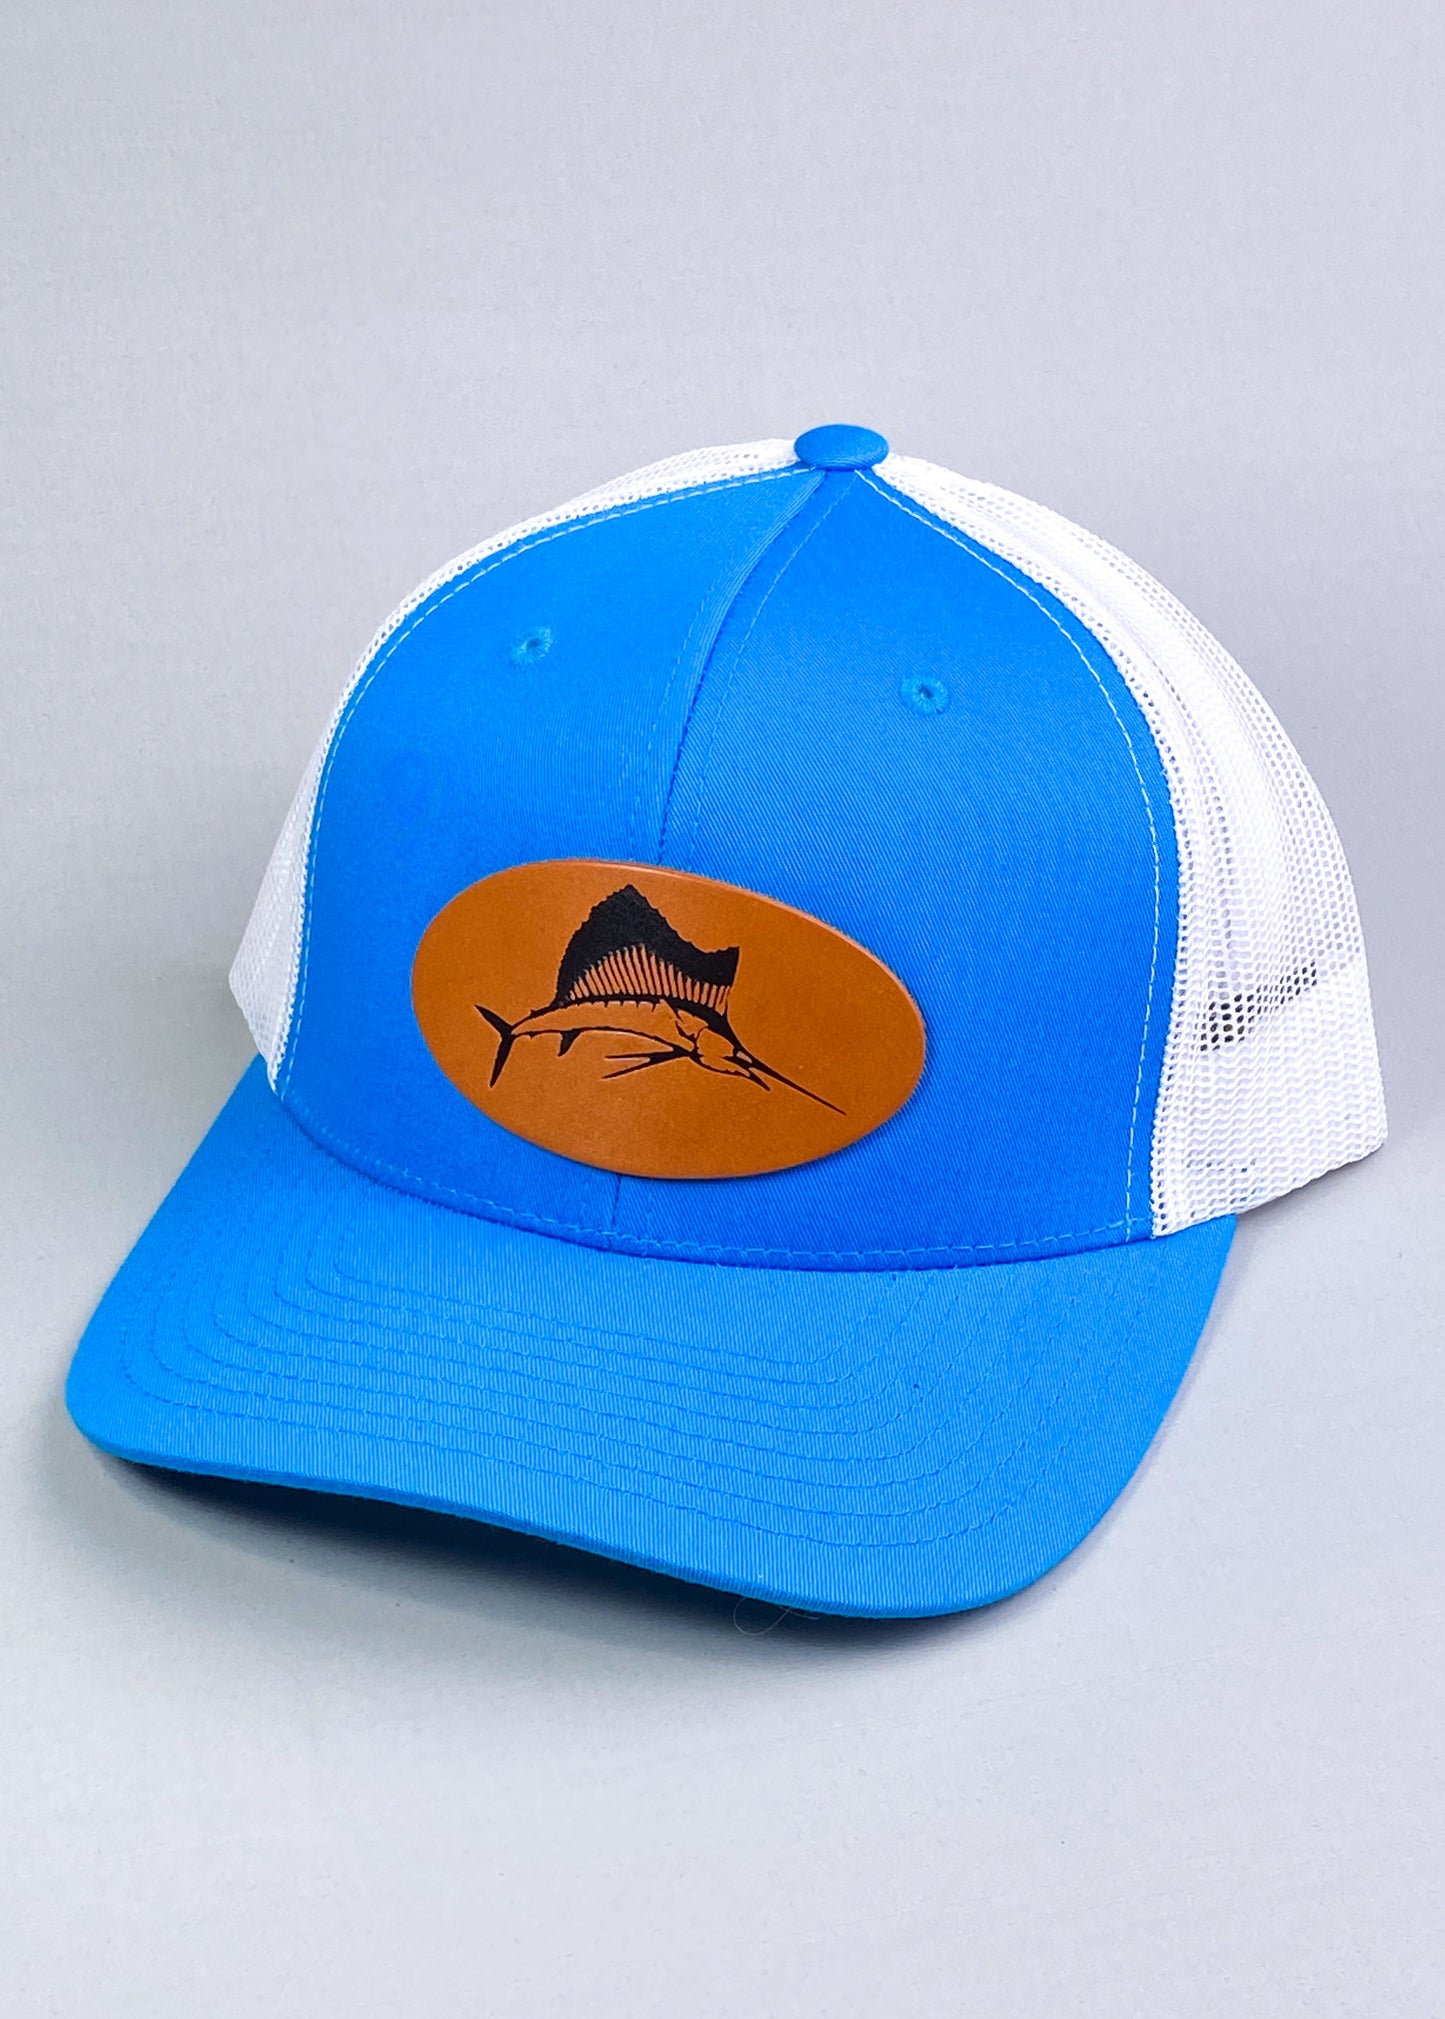 Bravo Premium hat in turquoise/white with sailfish design leather patch